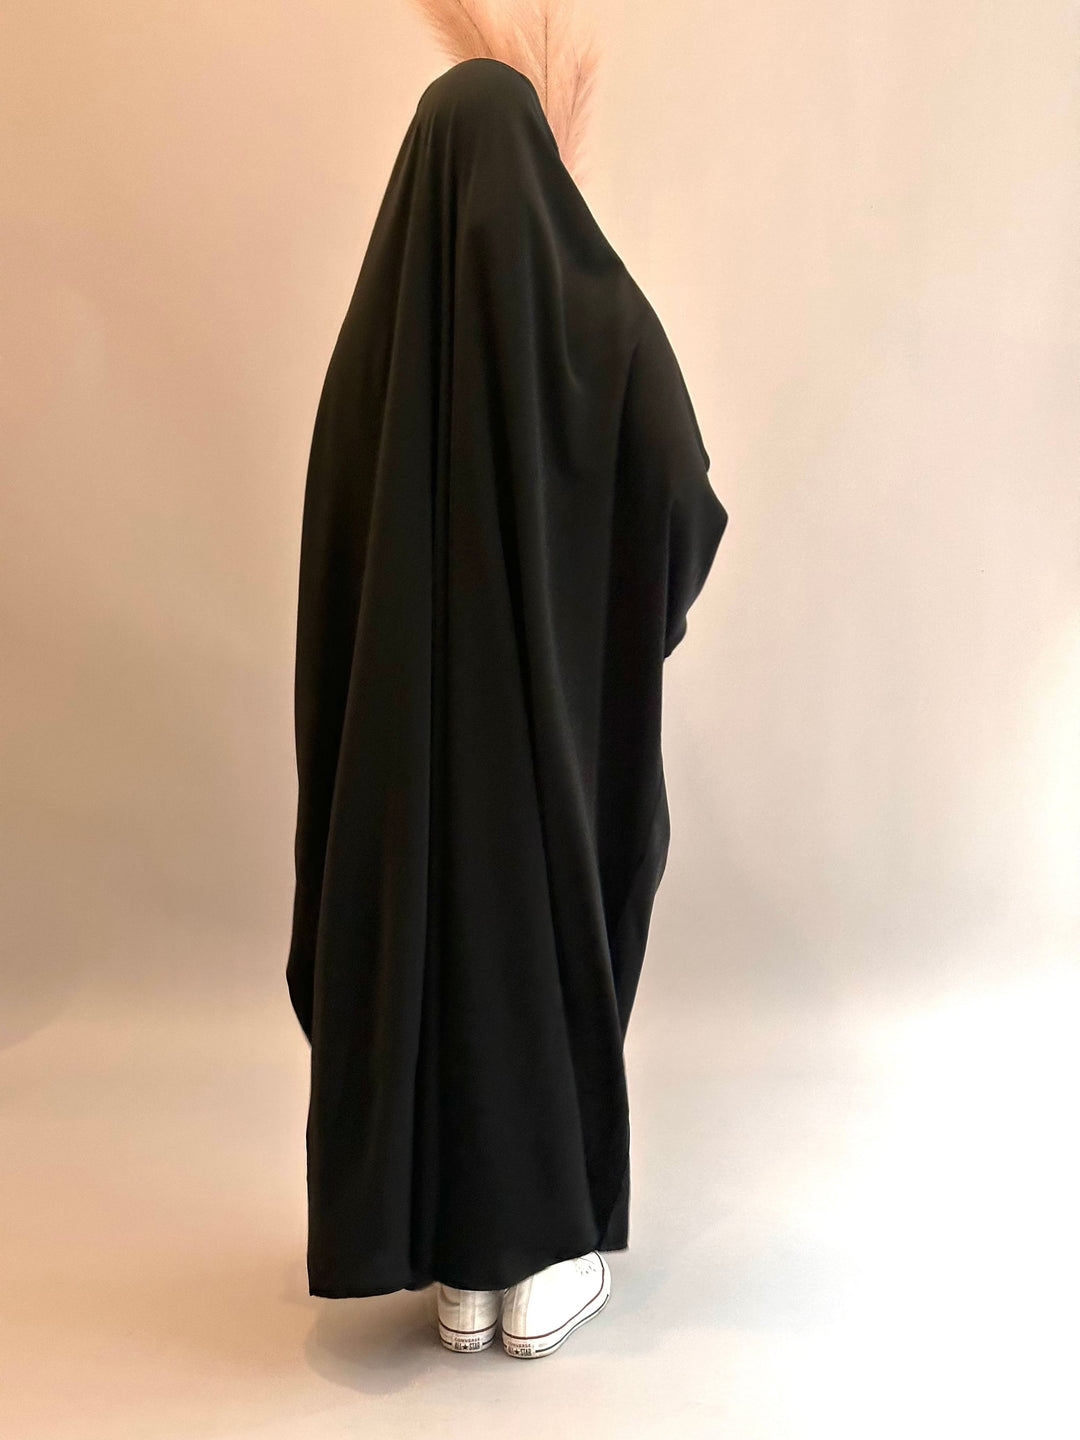 Get trendy with Sarah Niqab Jilbab - Black -  available at Voilee NY. Grab yours for $17.99 today!